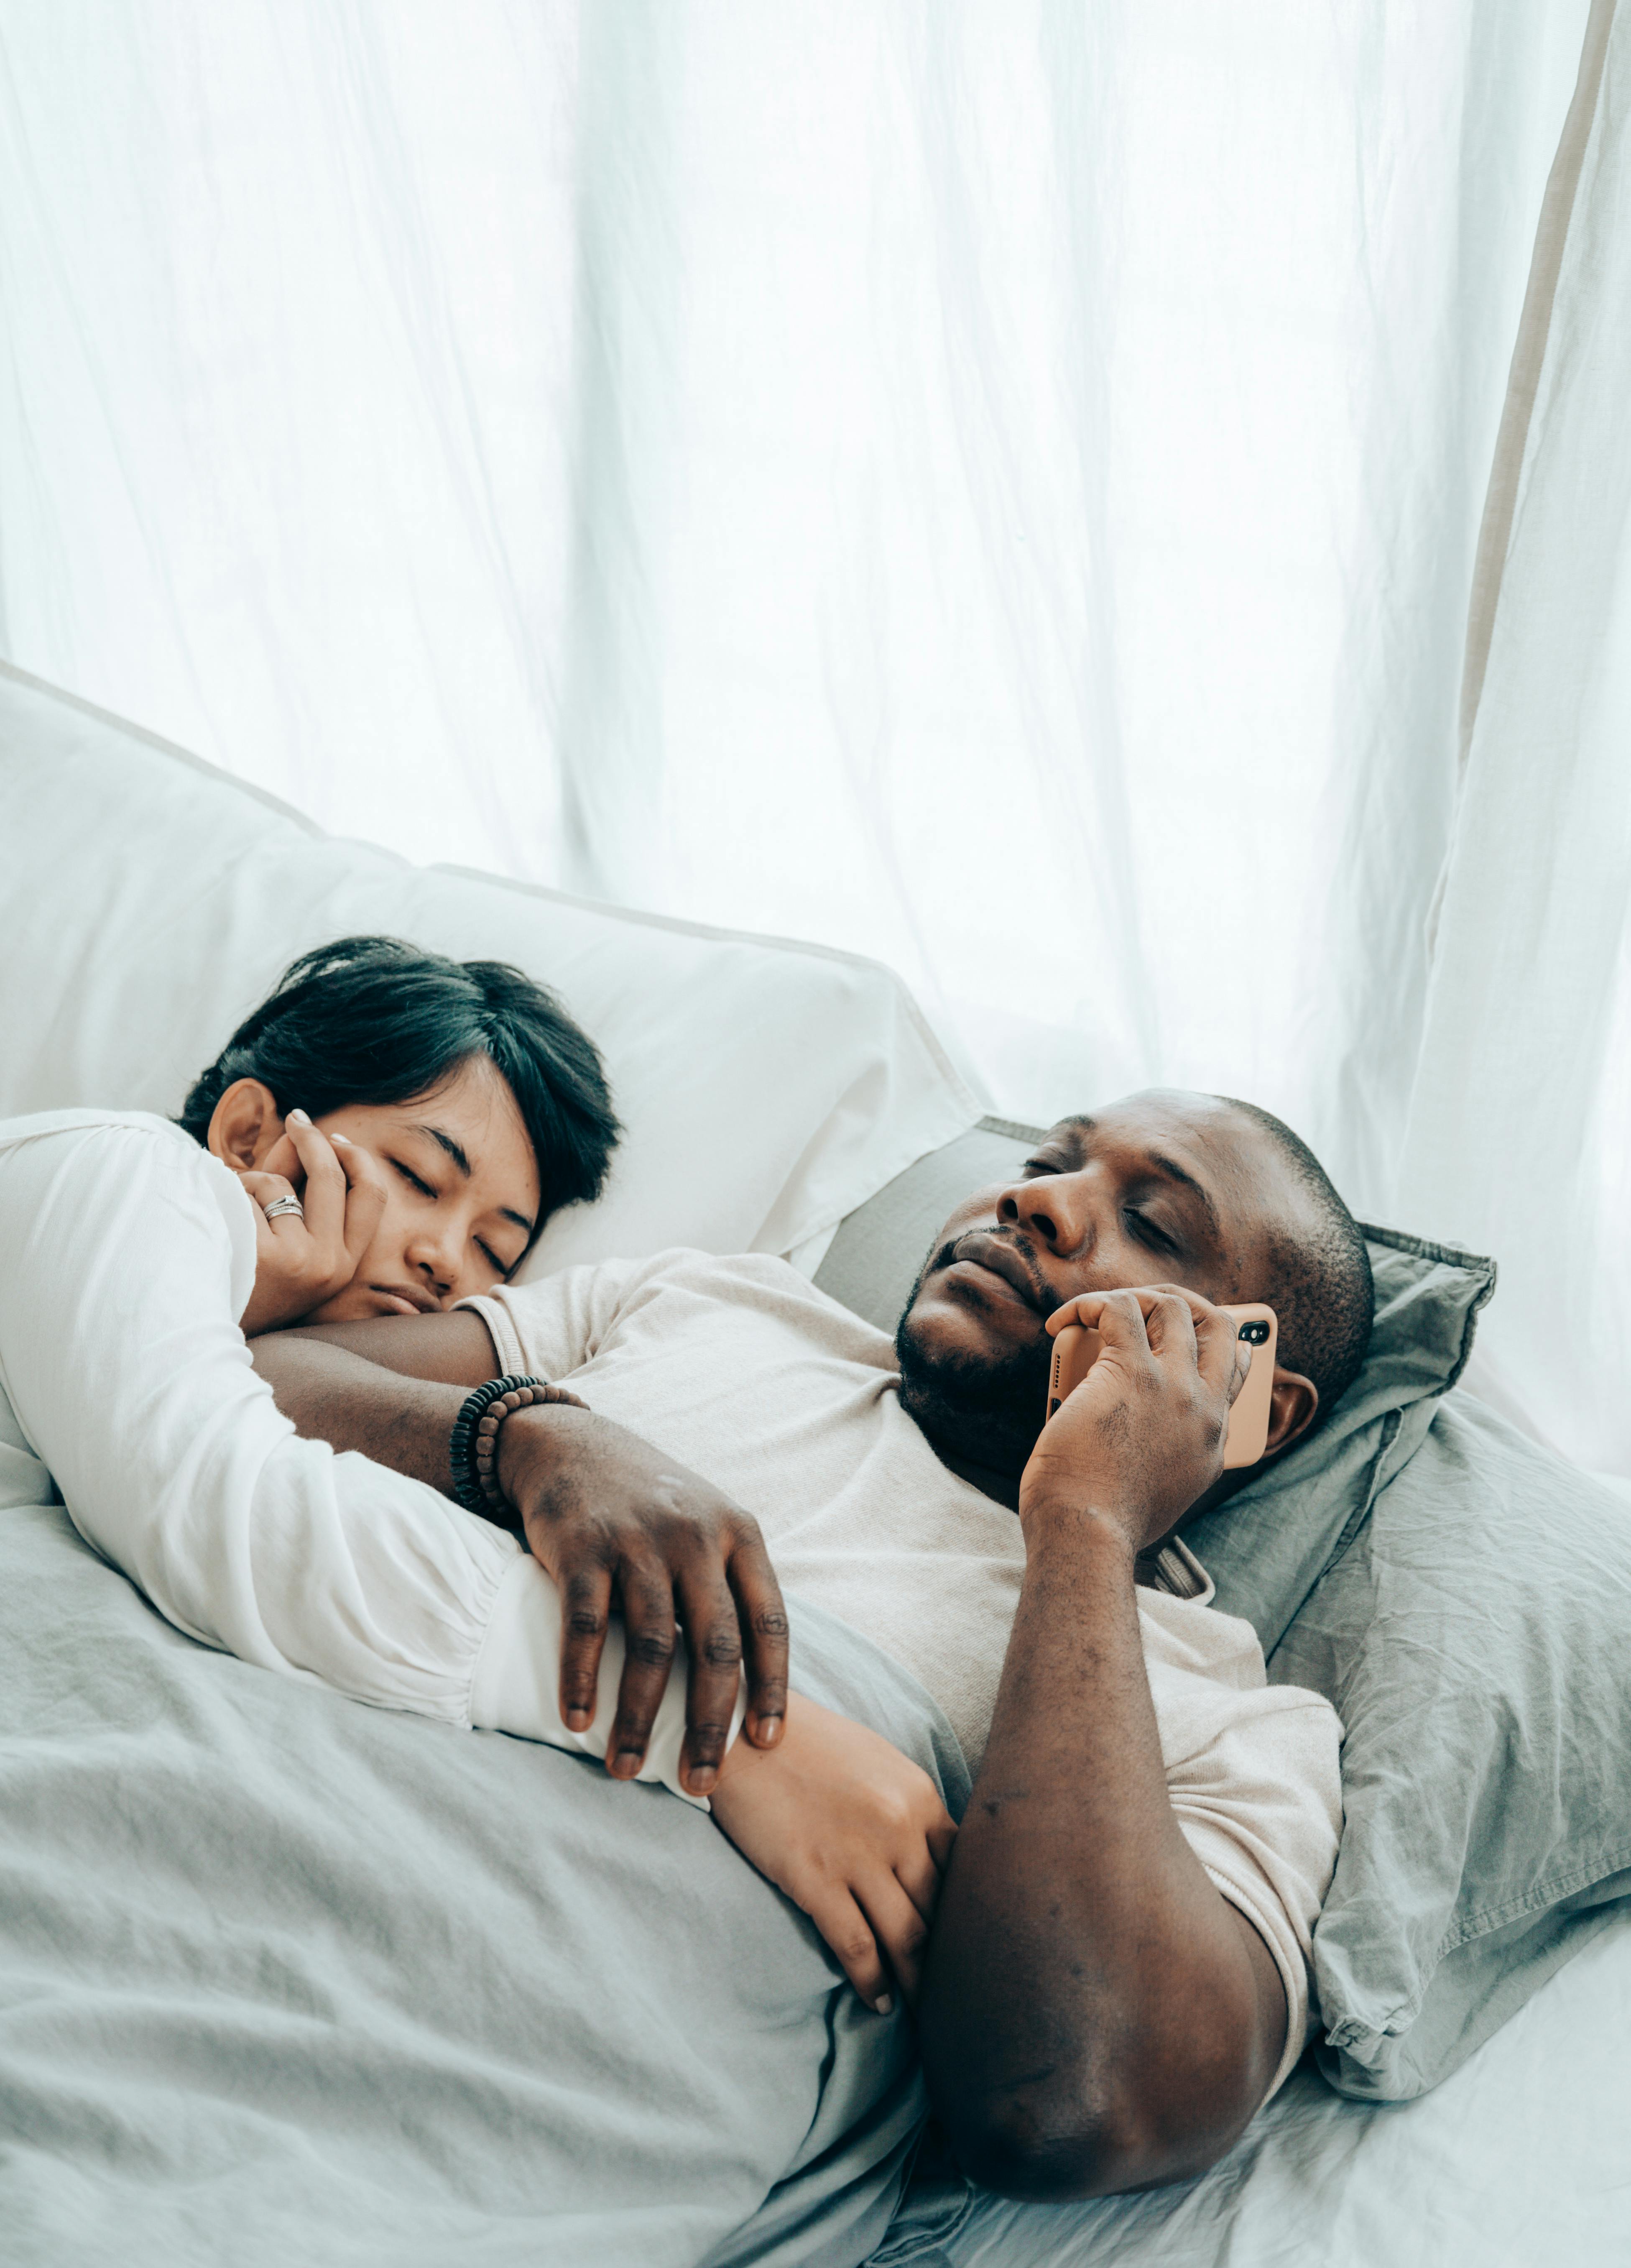 Couple lying in a comfortable bed. | Photo: Pexels